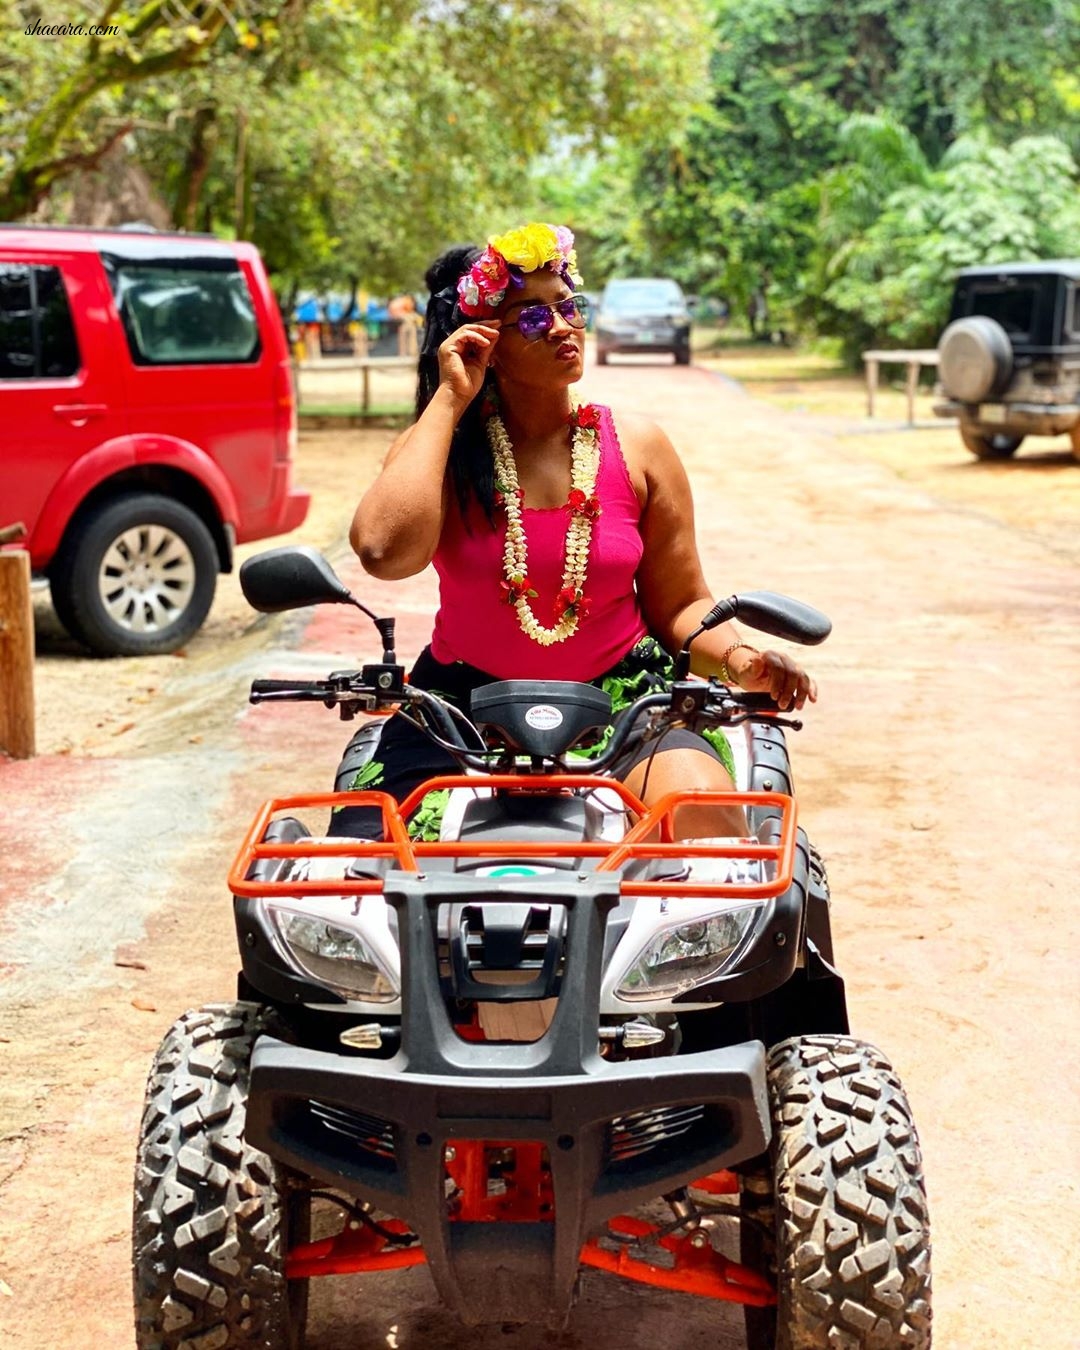 All The Photos From Omotola Jalade-Ekeinde’s Fun Getaway With Her Kids